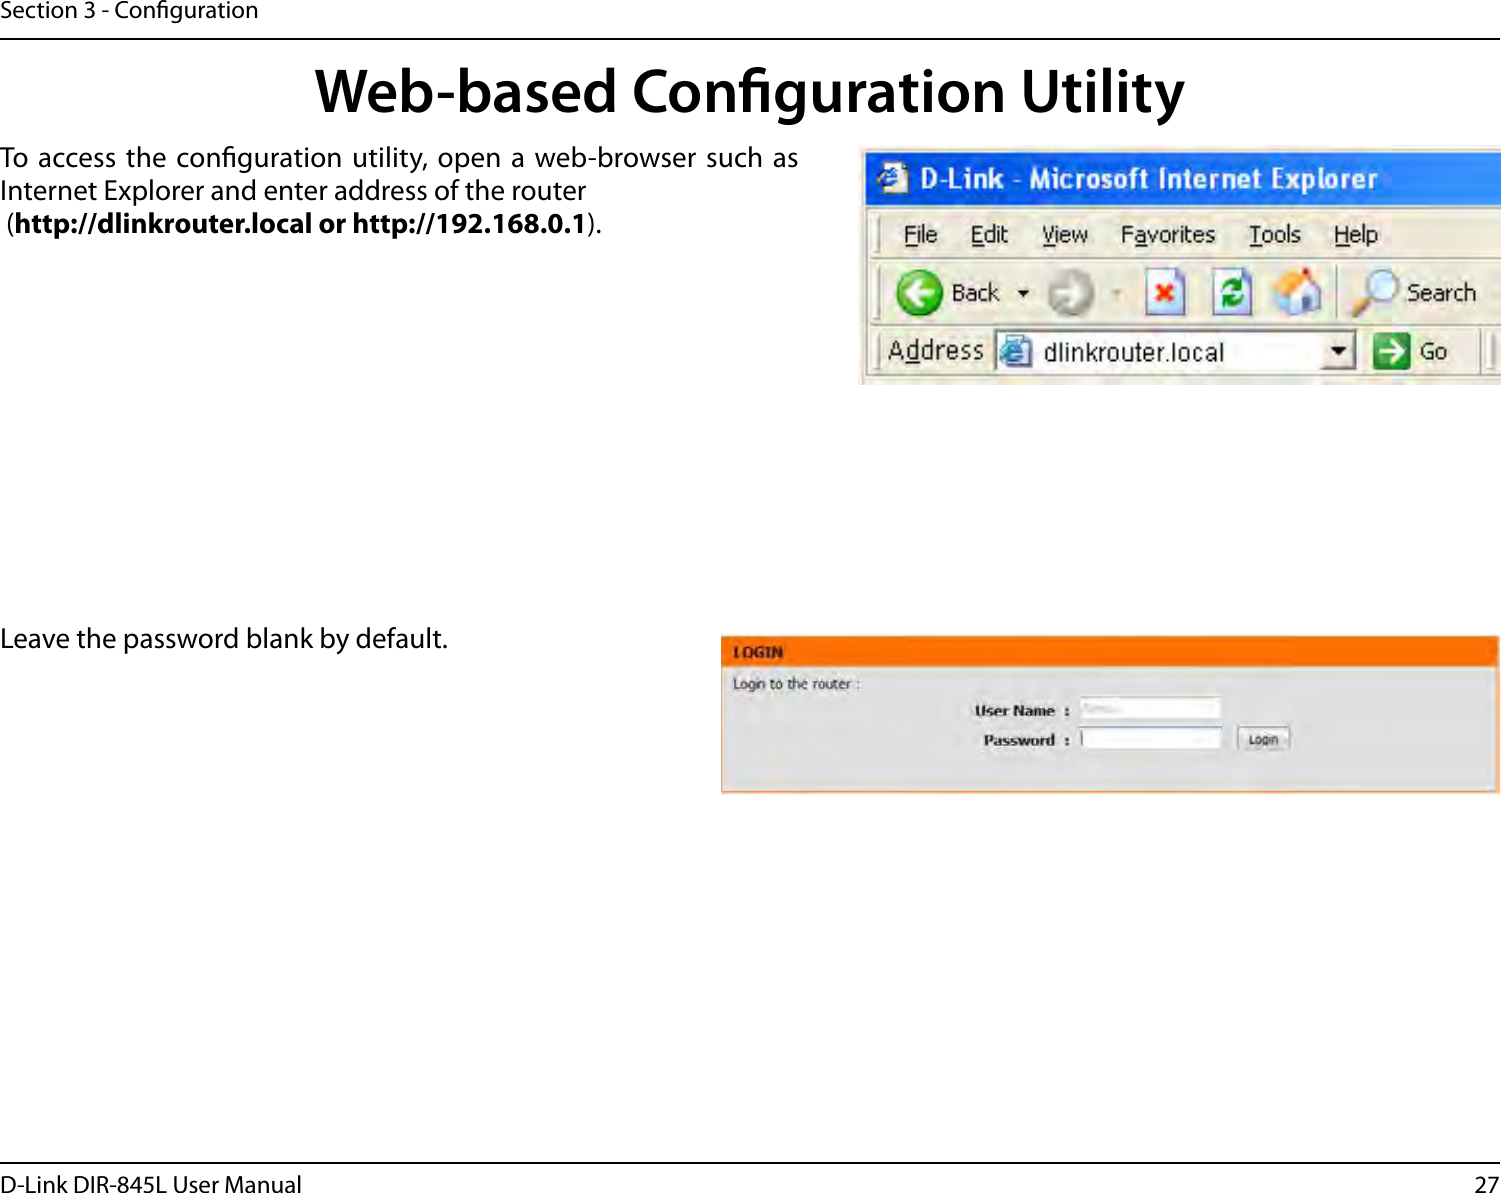 27D-Link DIR-845L User ManualSection 3 - CongurationWeb-based Conguration UtilityLeave the password blank by default.To  access the conguration utility, open  a web-browser such  as Internet Explorer and enter address of the router (http://dlinkrouter.local or http://192.168.0.1).